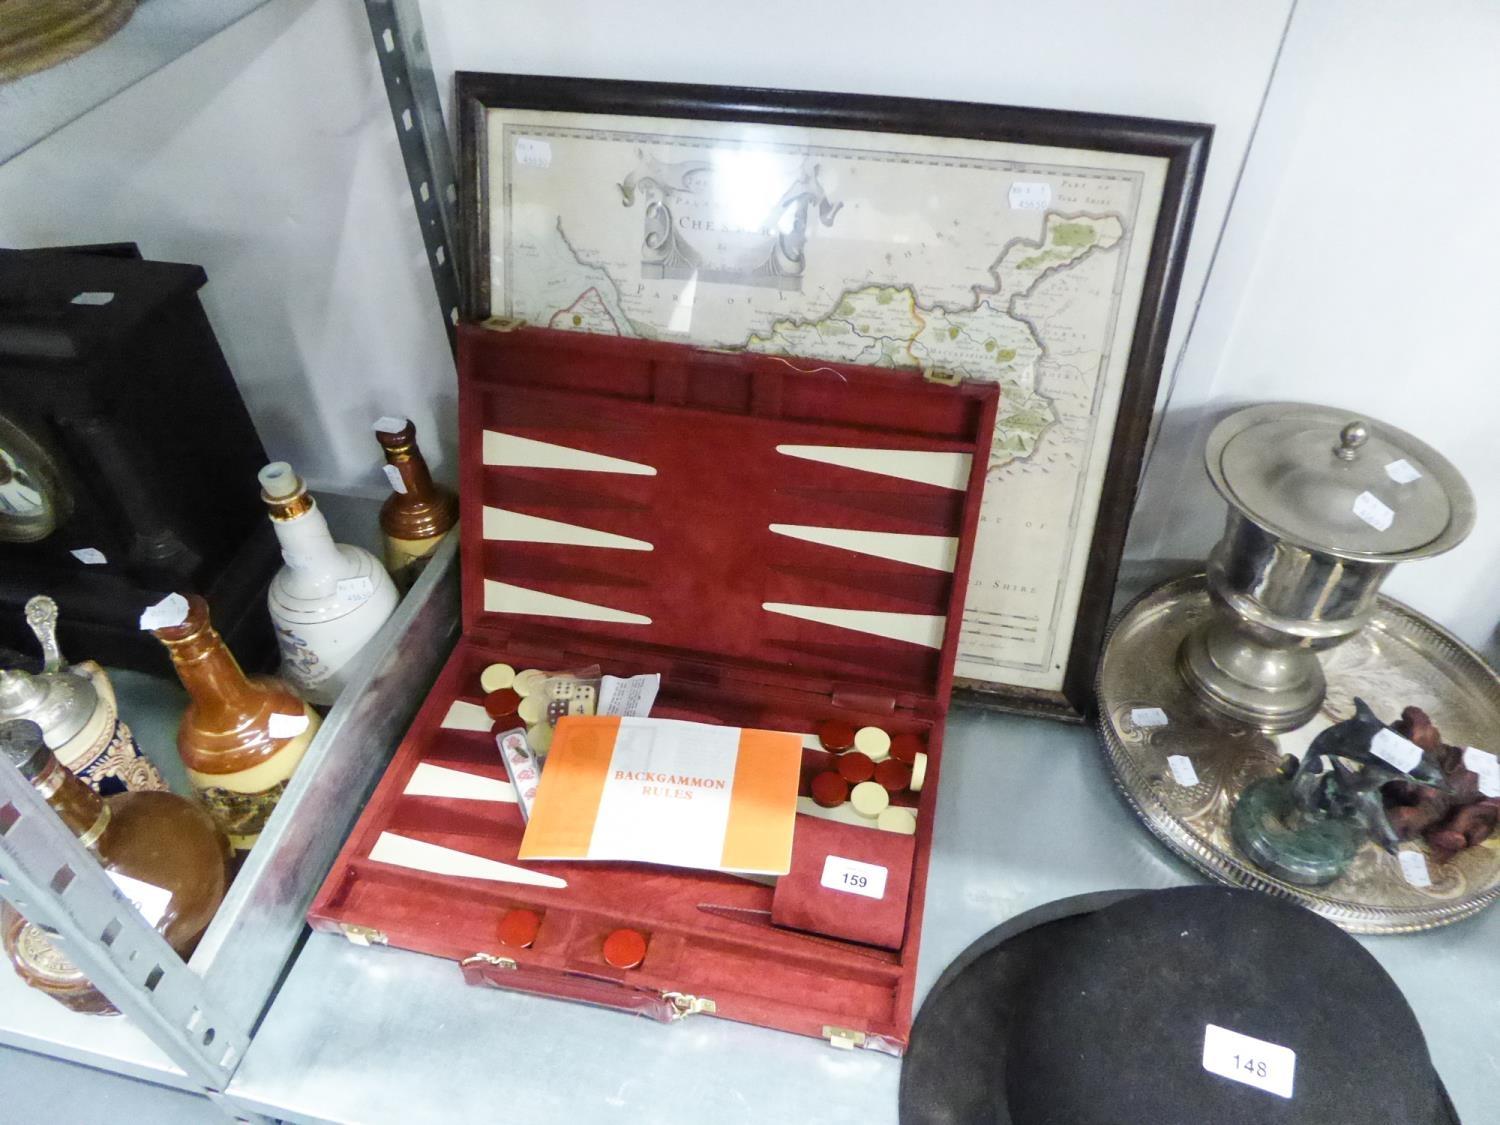 A BACKGAMMON SET IN A RED VELVET CASE AND A FRAMED MAP OF THE COUNTY PALATINE OF CHESTER BY R.